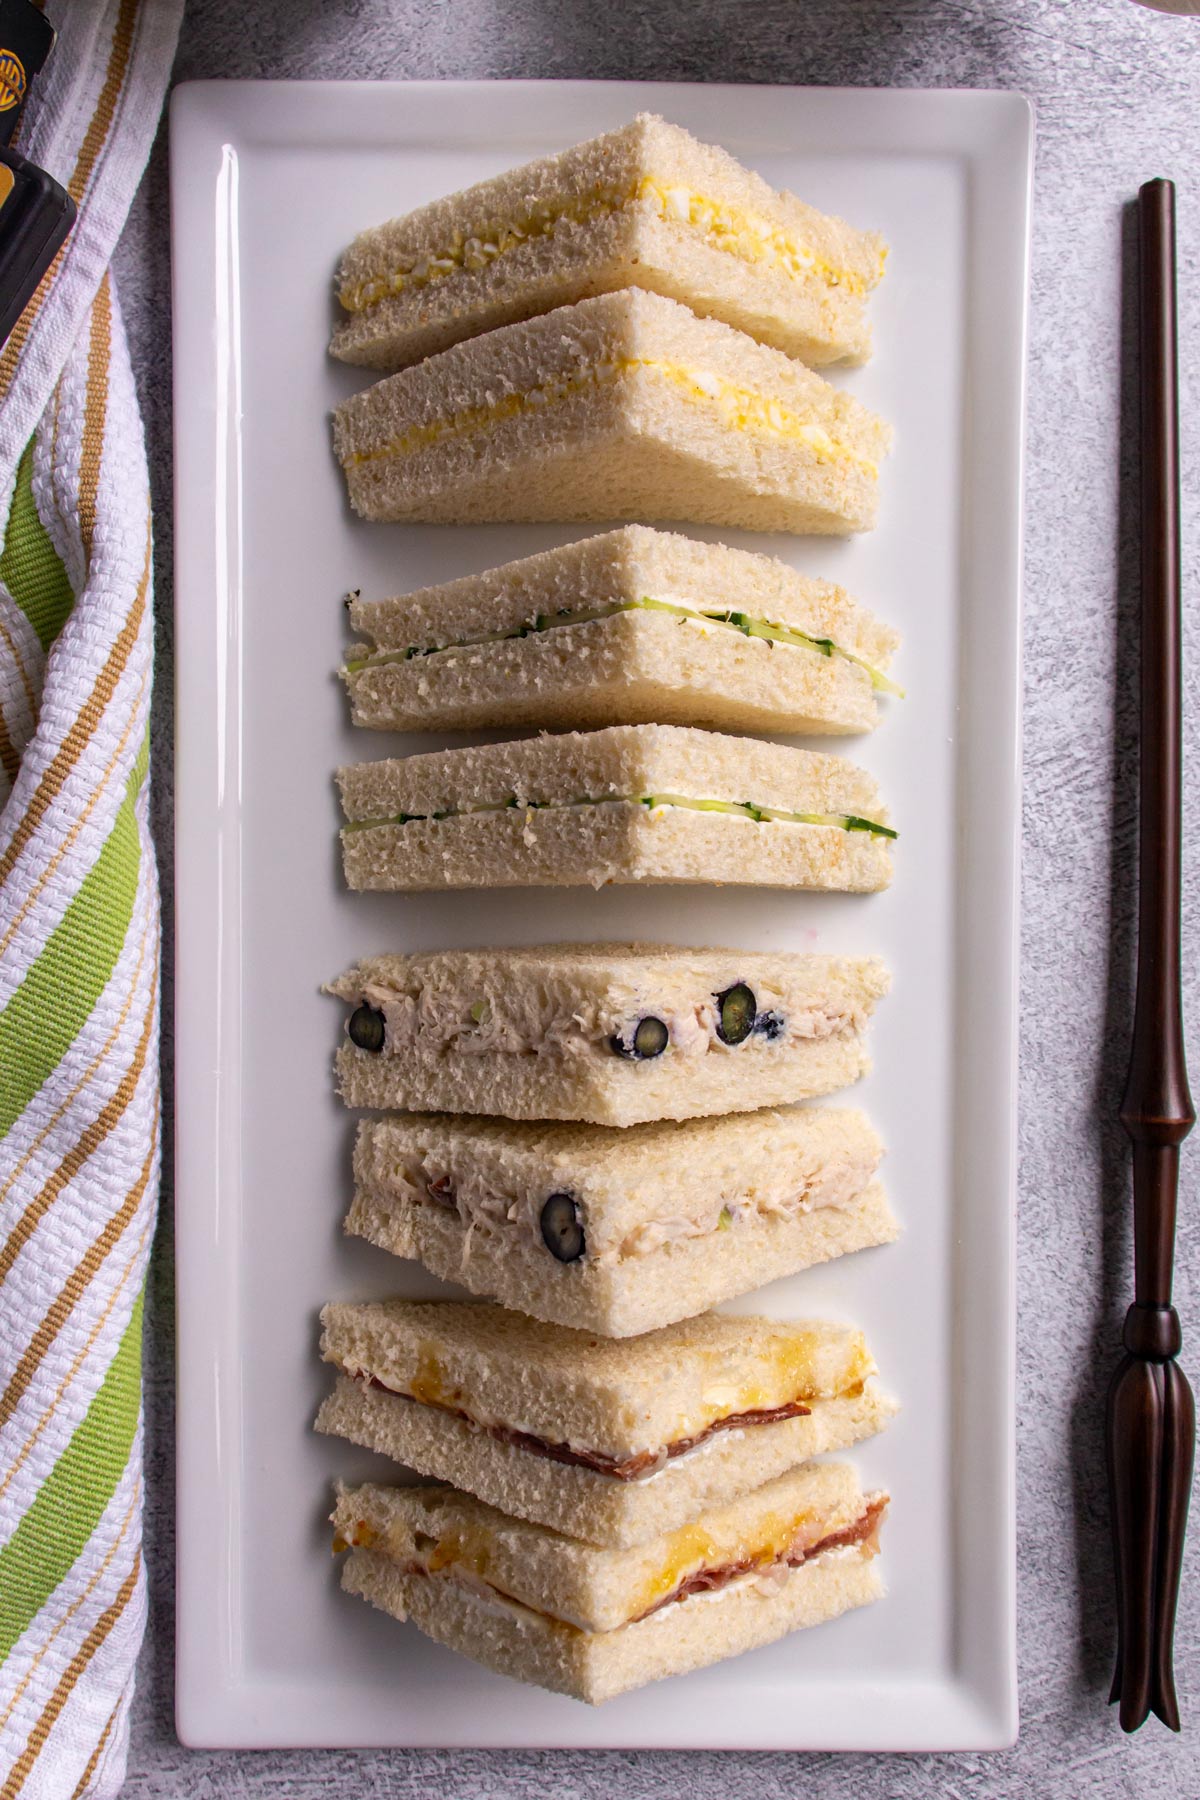 Harry Potter inspired afternoon tea sandwiches cut into triangles and arranged on a one rectangular platter.